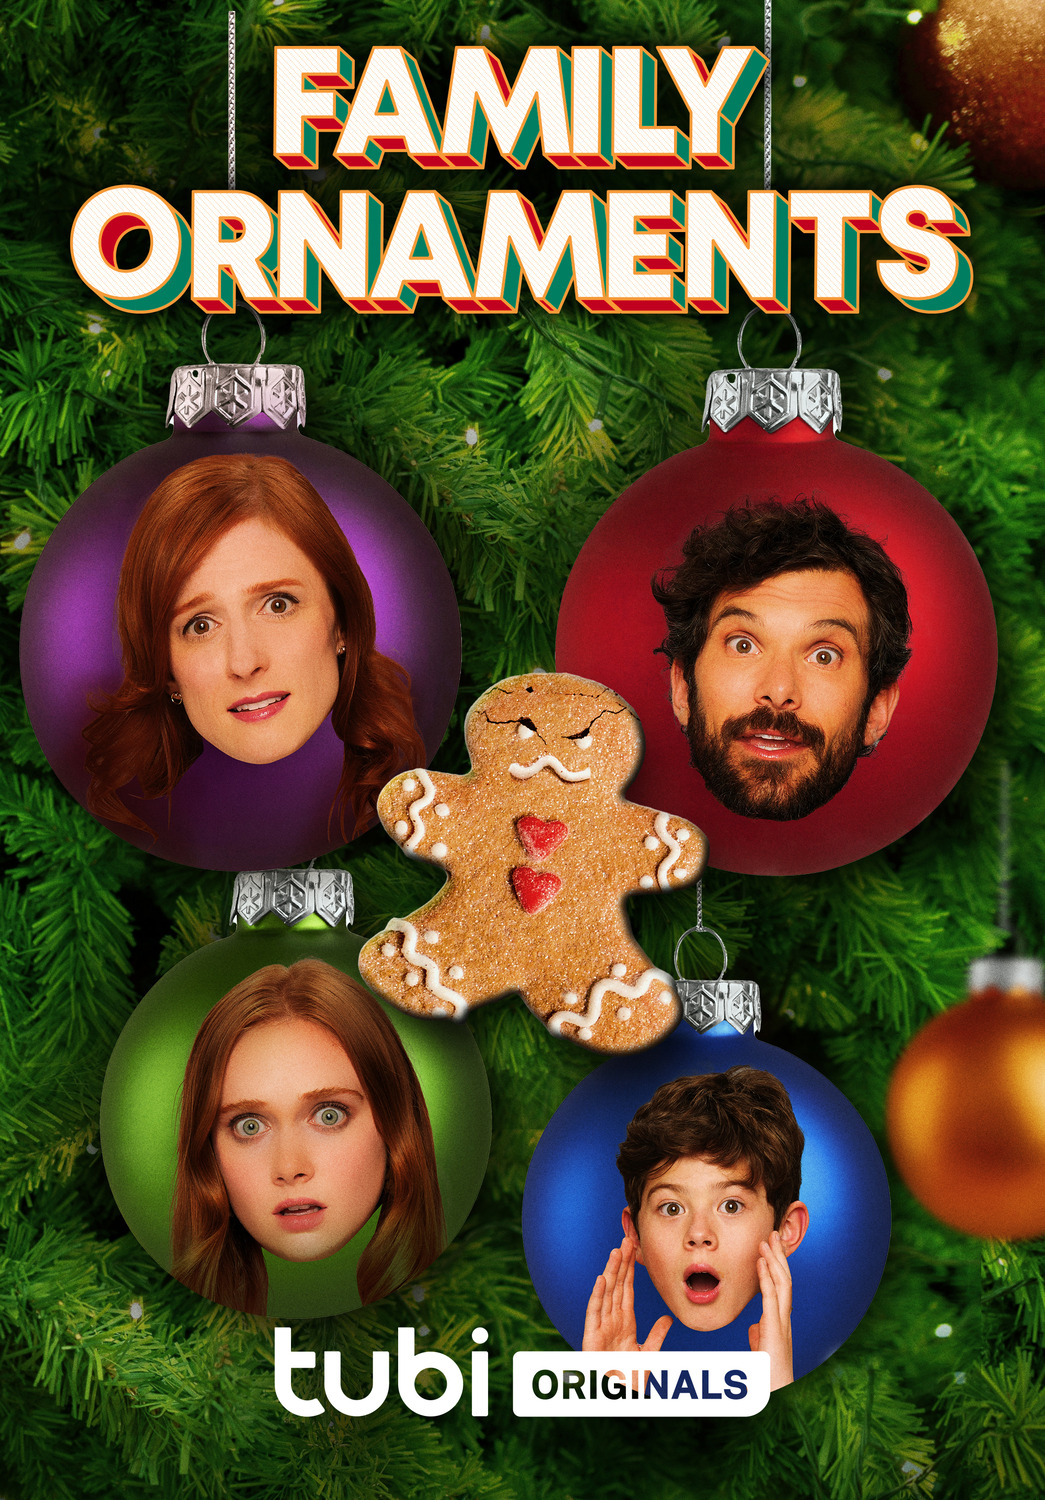 Extra Large Movie Poster Image for Family Ornaments 